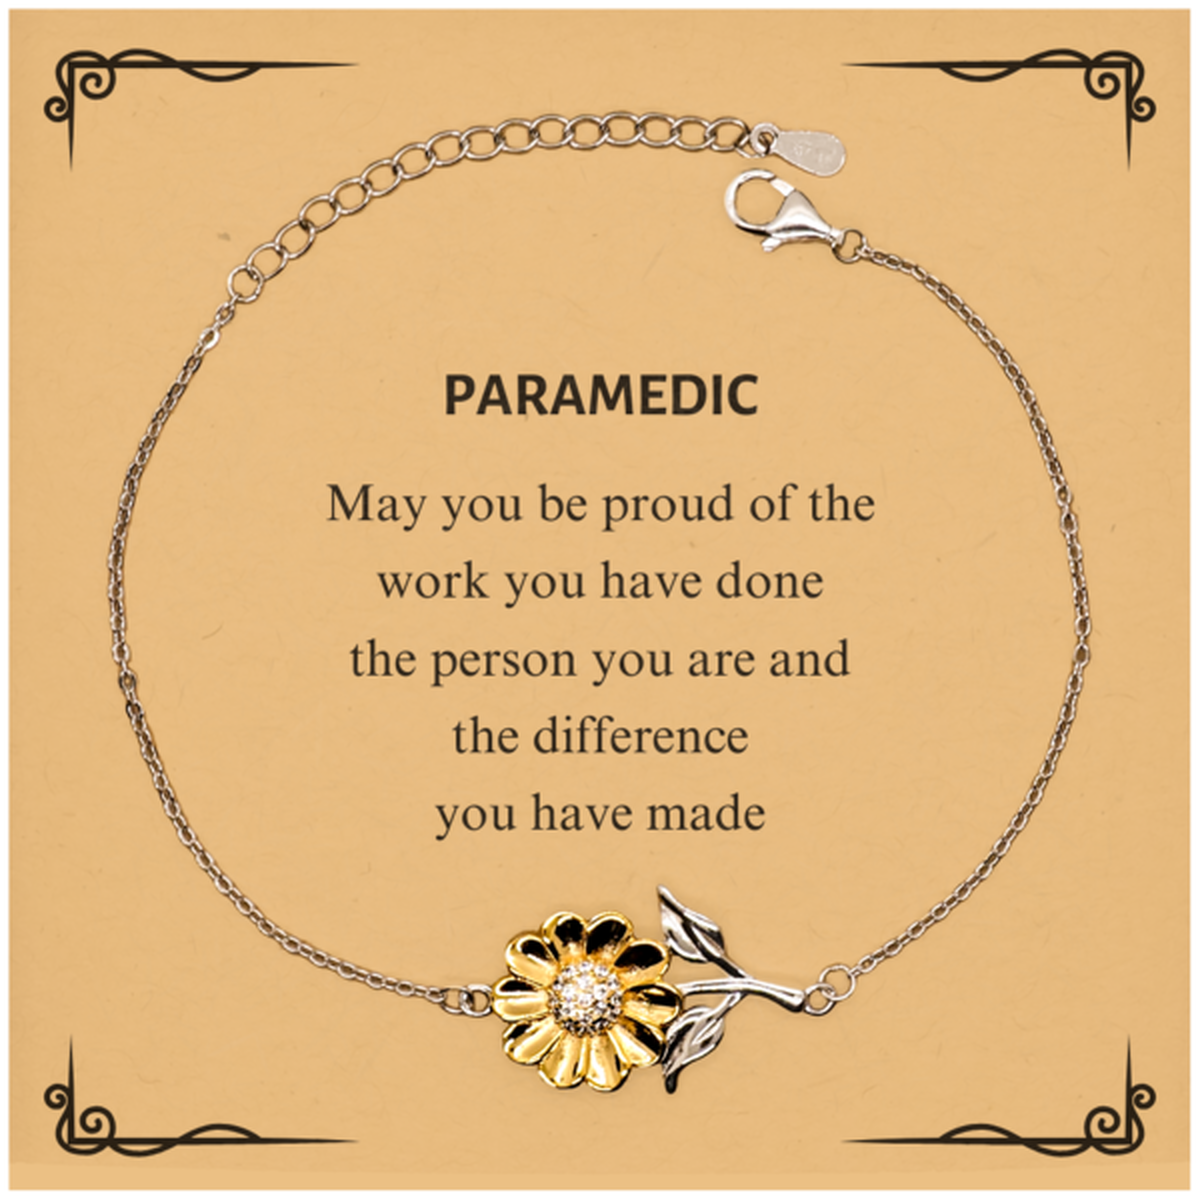 Paramedic May you be proud of the work you have done, Retirement Paramedic Sunflower Bracelet for Colleague Appreciation Gifts Amazing for Paramedic